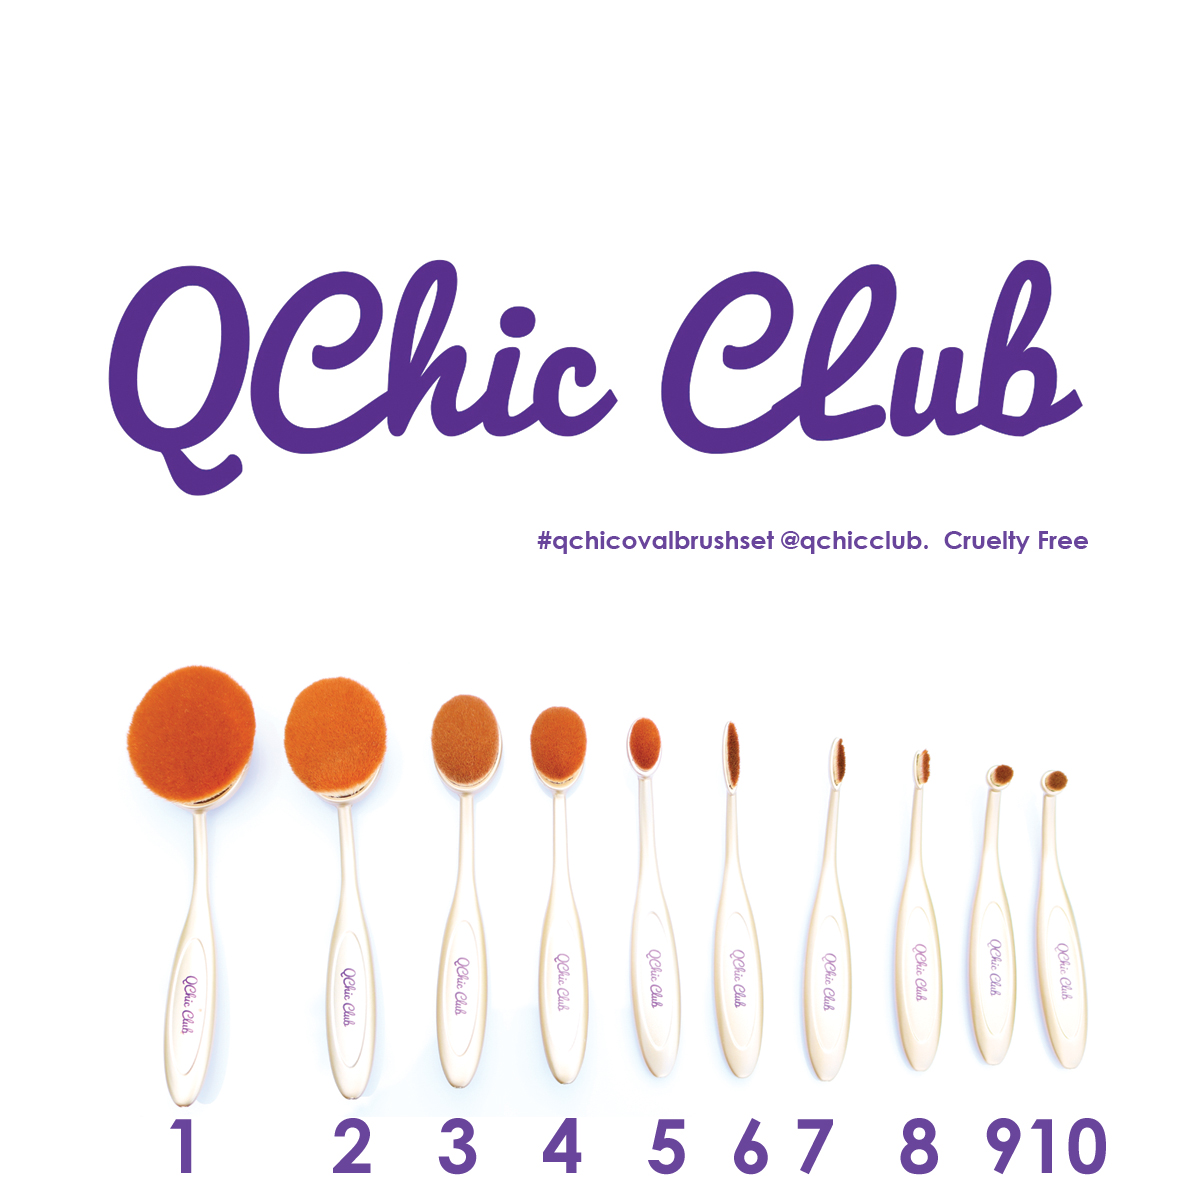 Oval Brush Set, QChic oval Brushes,  Makeup Brushes, Unboxing, Chic, Trending, Makeup trends, QChic Club, QChic Club Oval Brushes Set, Makejup Artist, Oval Toothbrush shaped makeup brushes